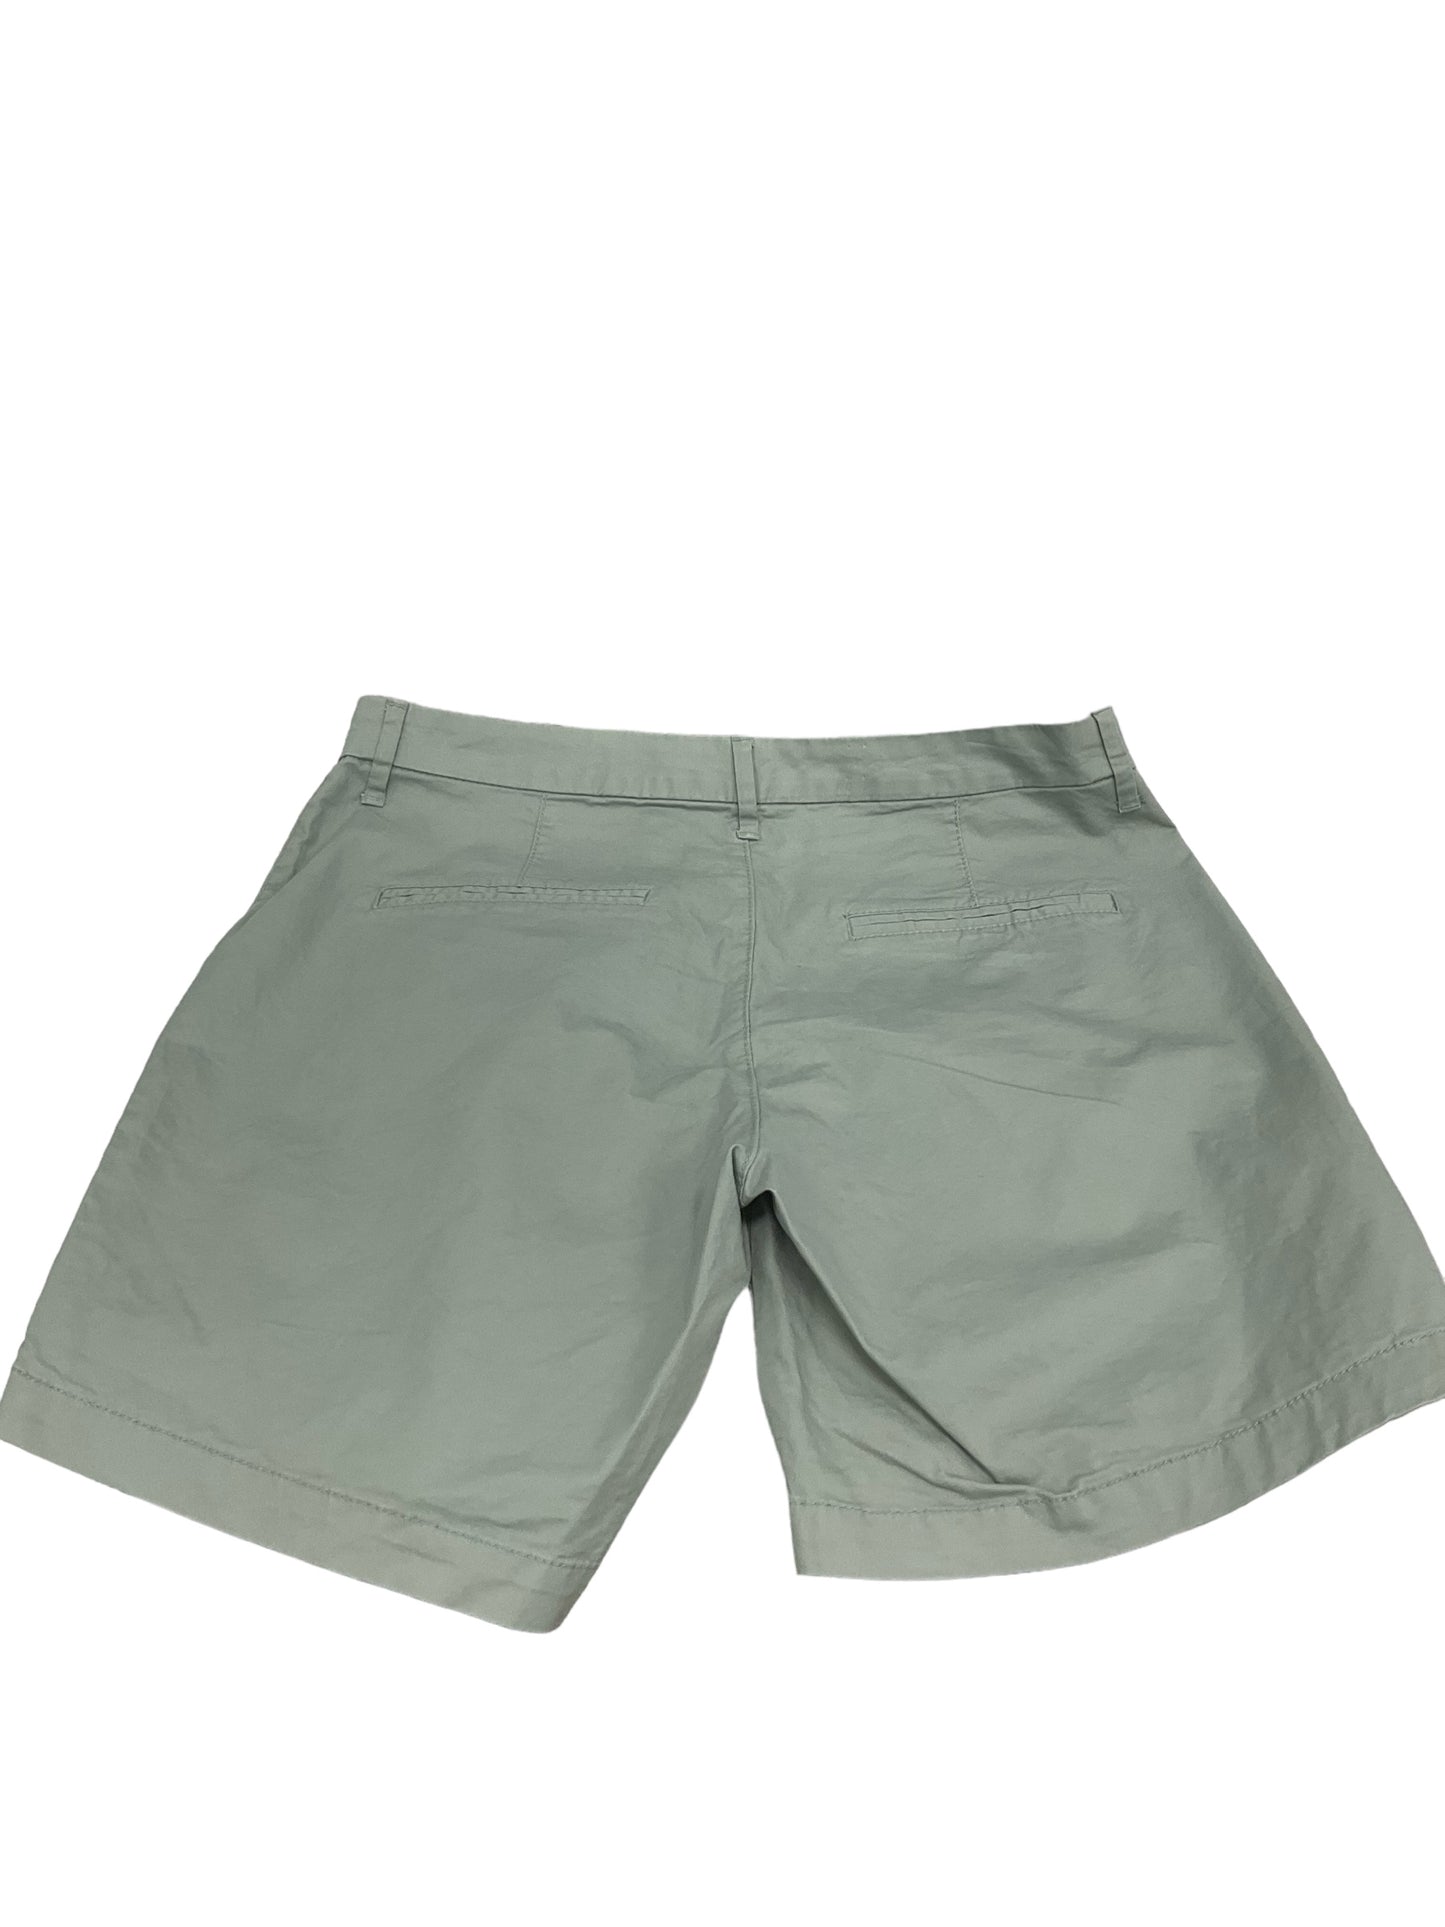 Shorts By Old Navy  Size: 8